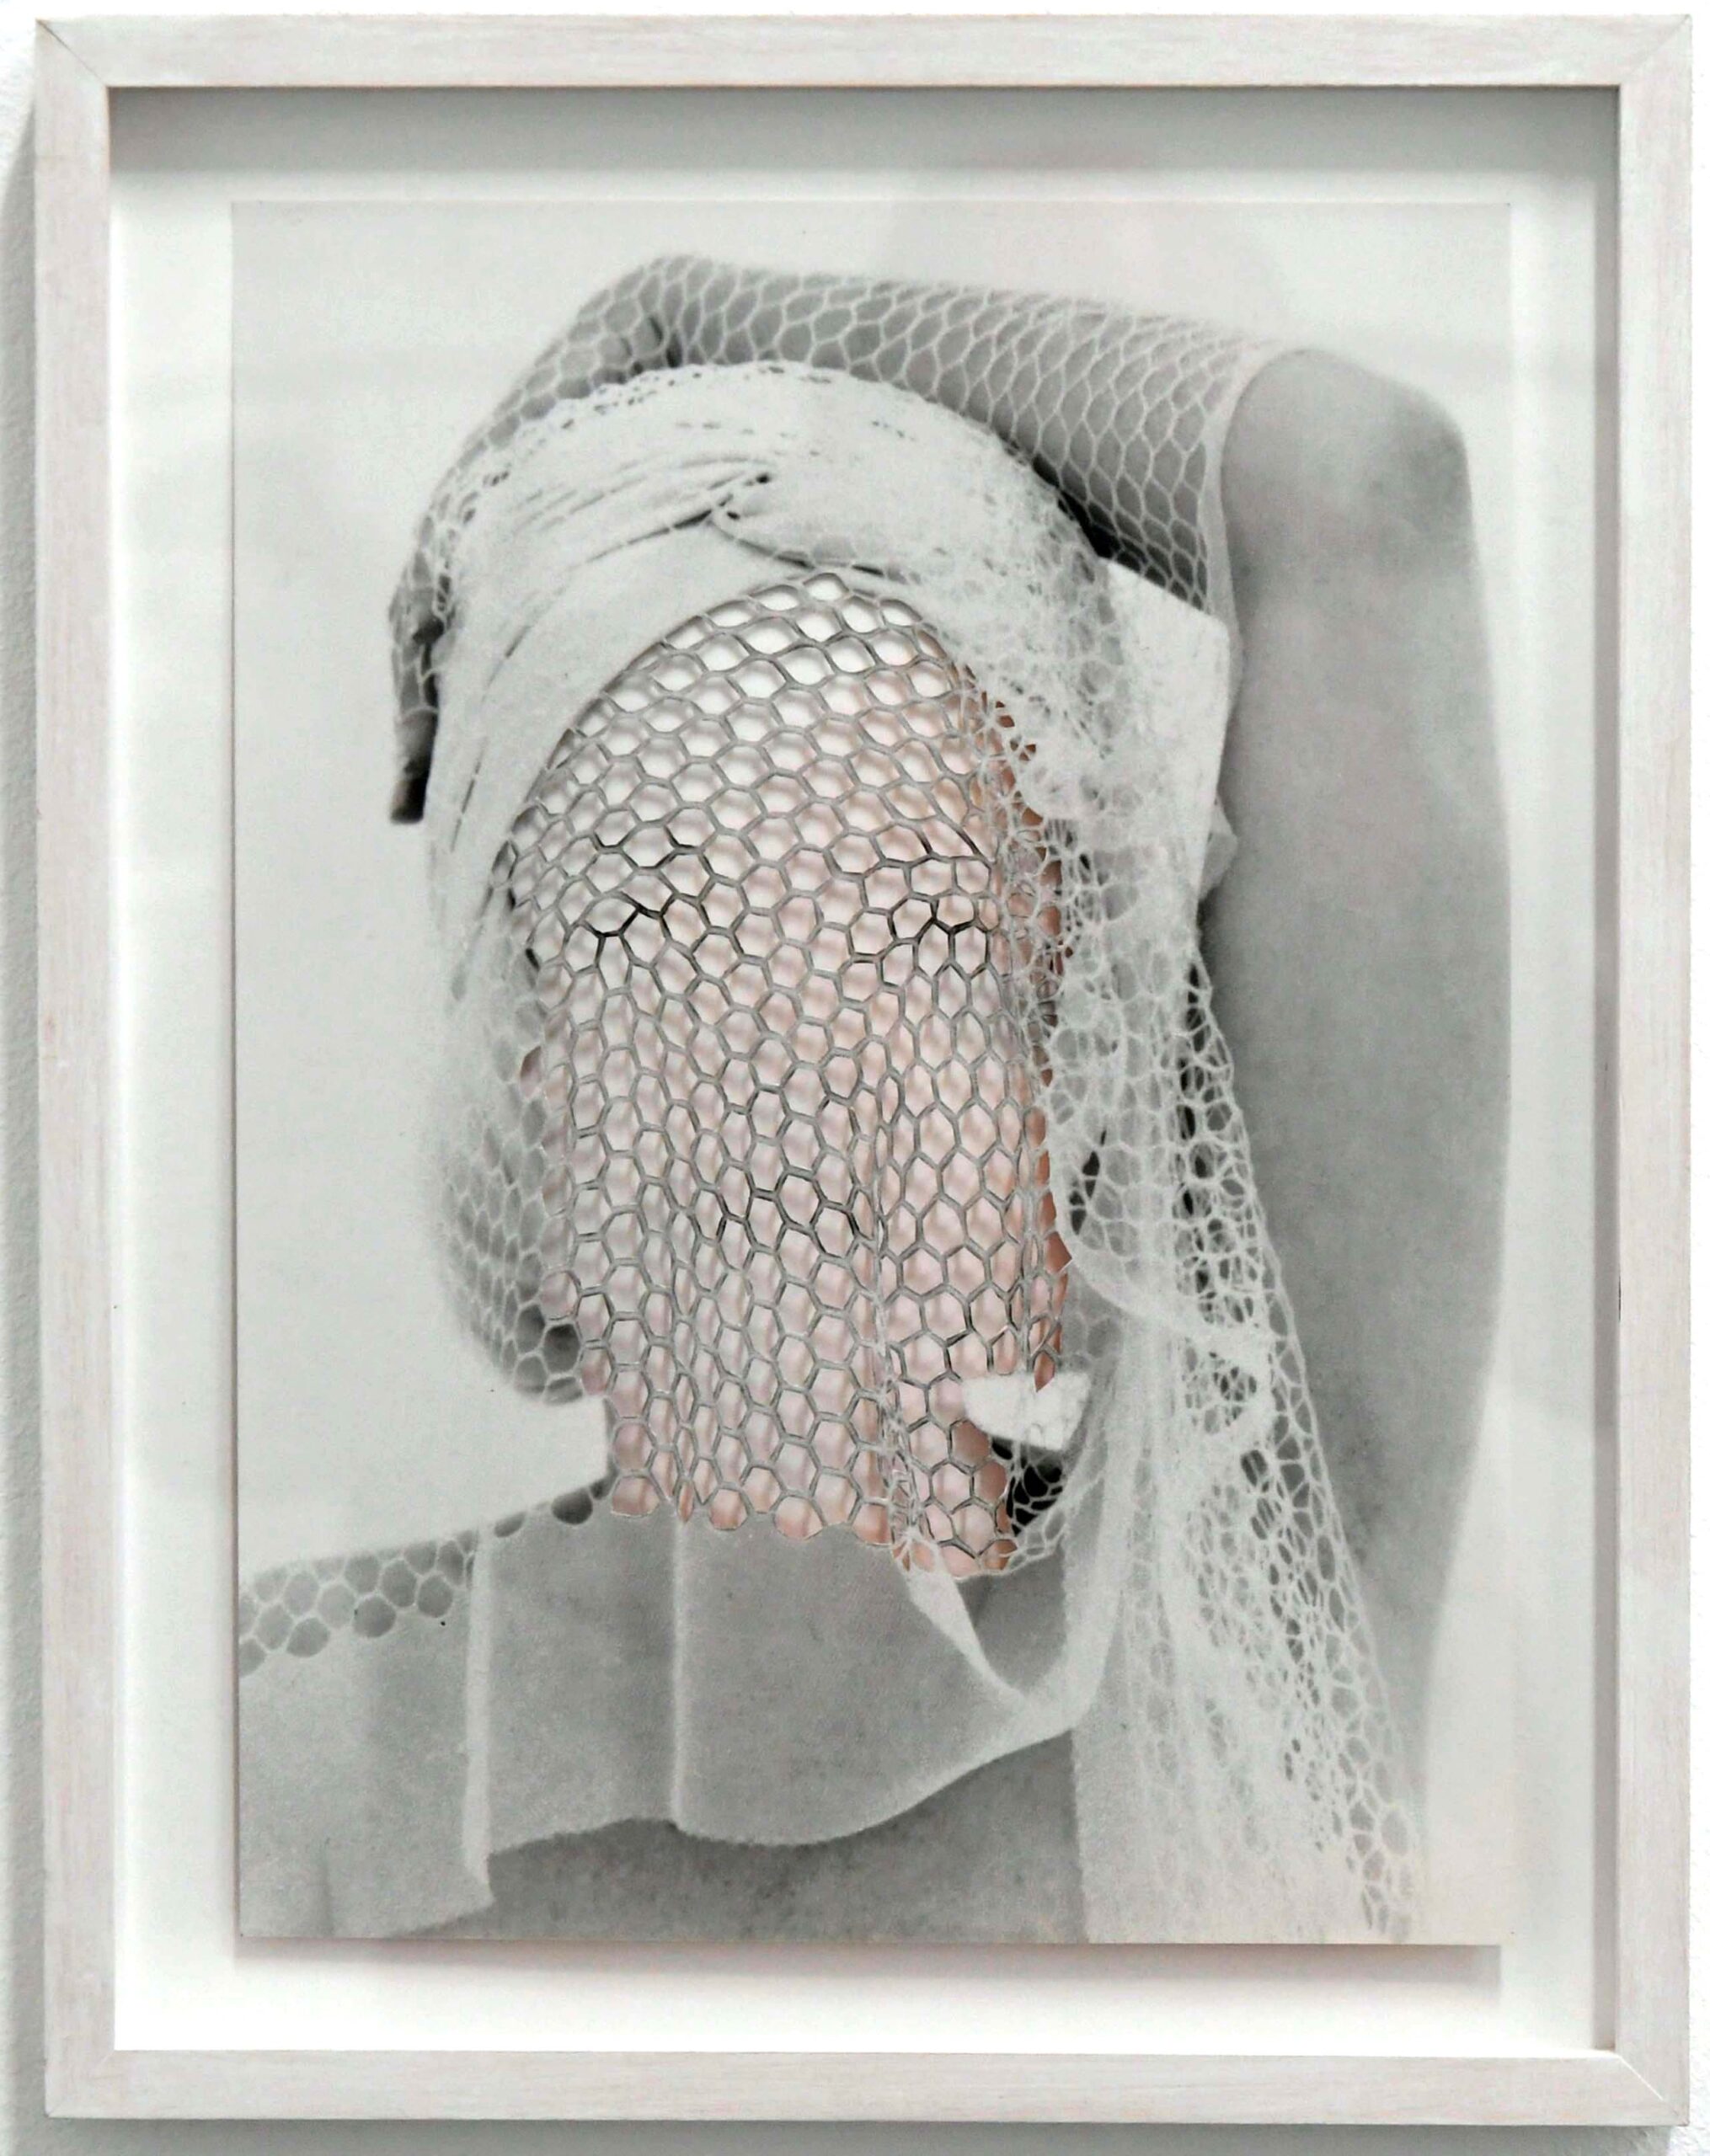 Karin Fisslthaler (2013), "Untitled (C)", Cut-Out from original Marilyn Monroe Photo Book Pages, 27 x 33 cm